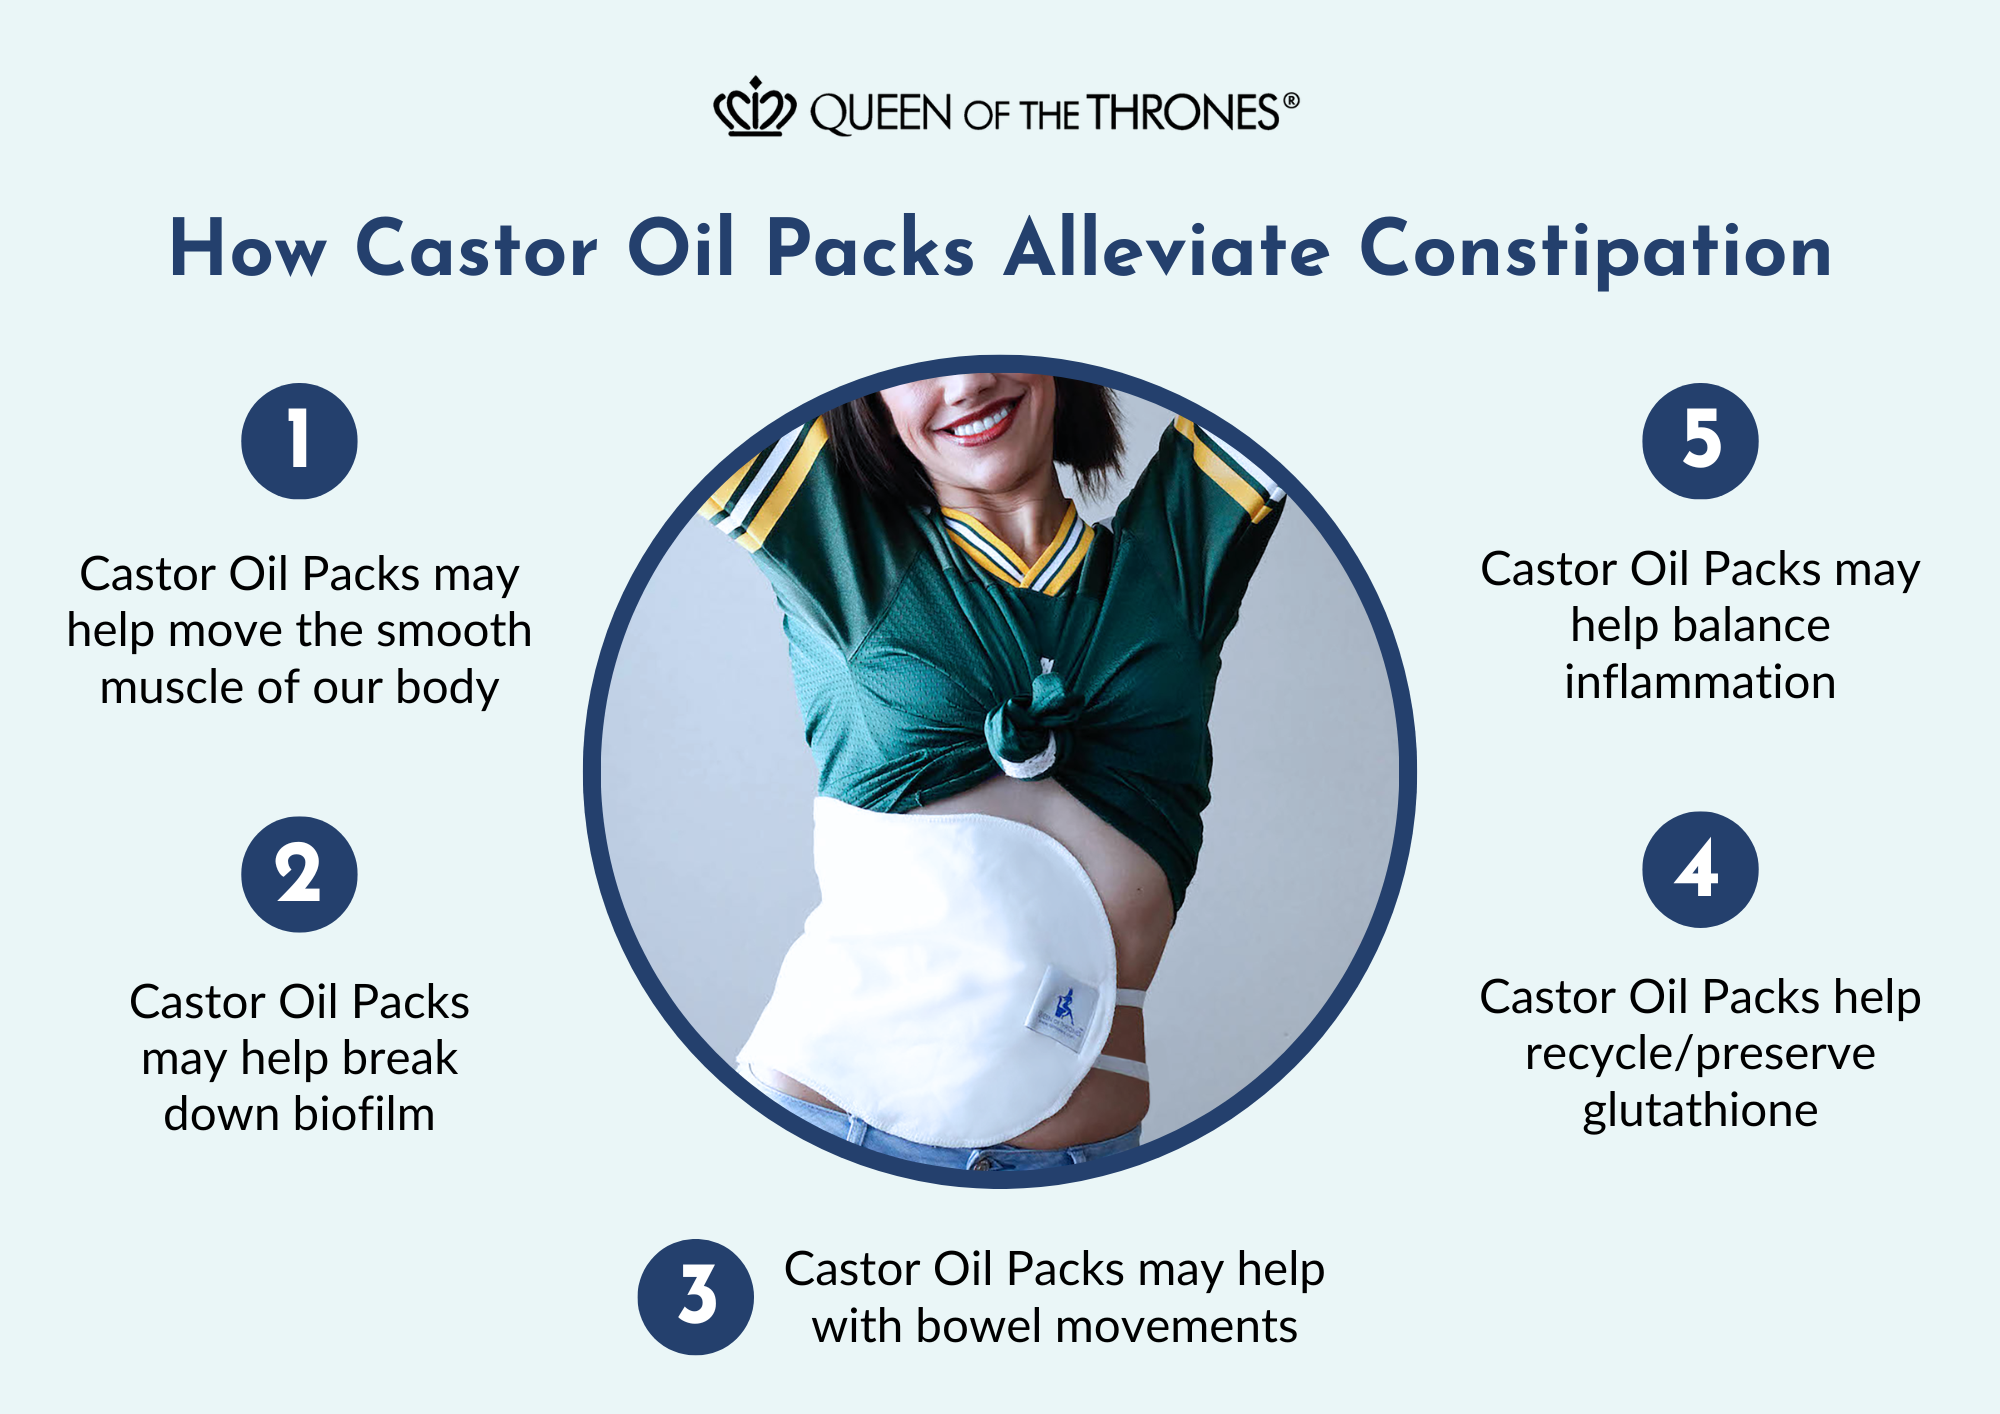 Queen of the Thrones Castor Oil Pack are the most recommended remedy for constipation